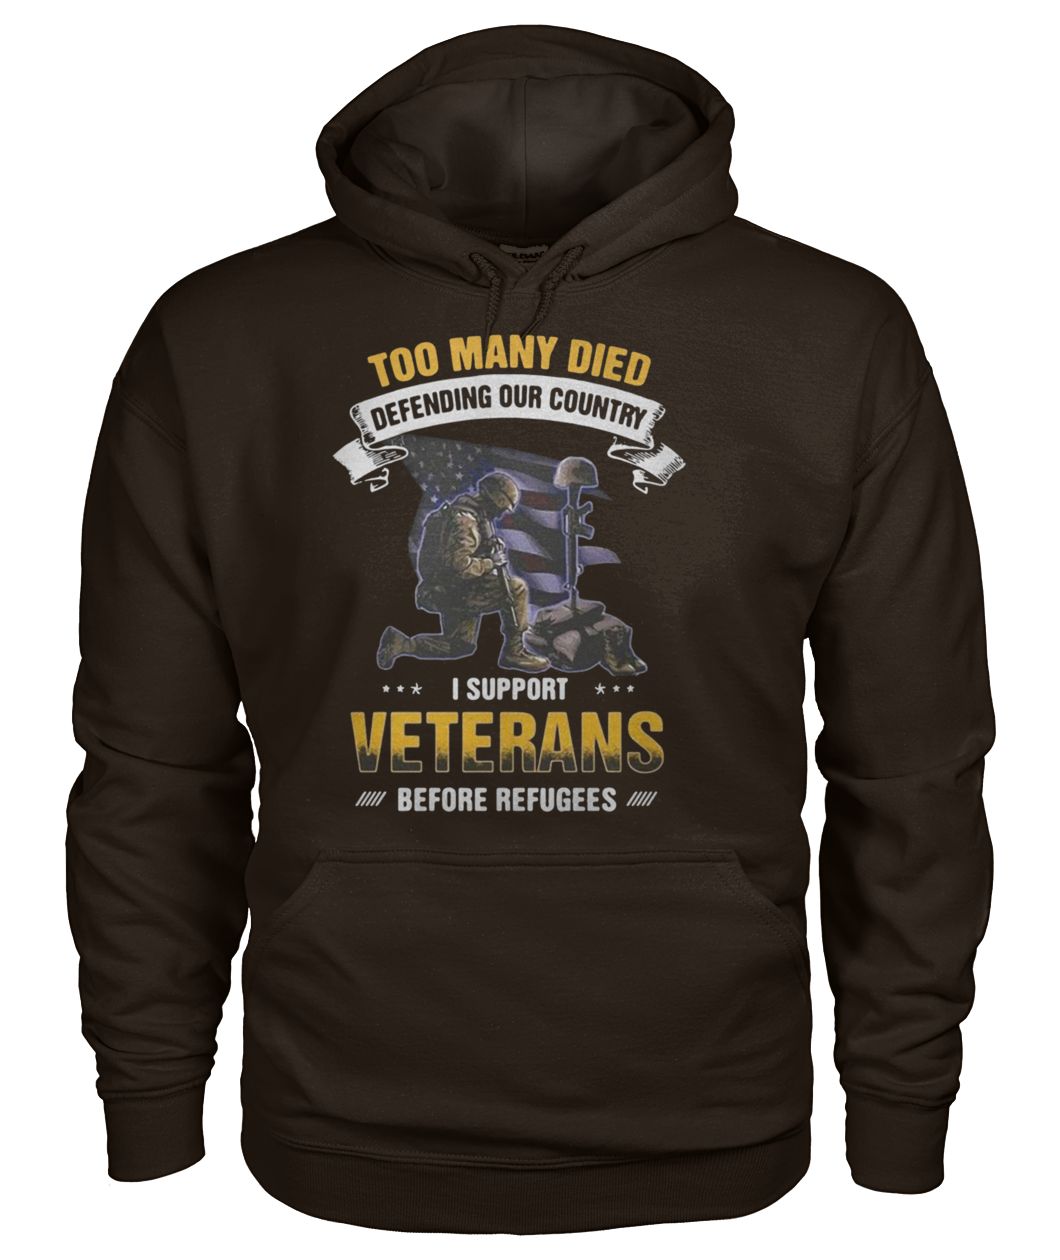 Too many died defending our country I support veterans before refugees gildan hoodie